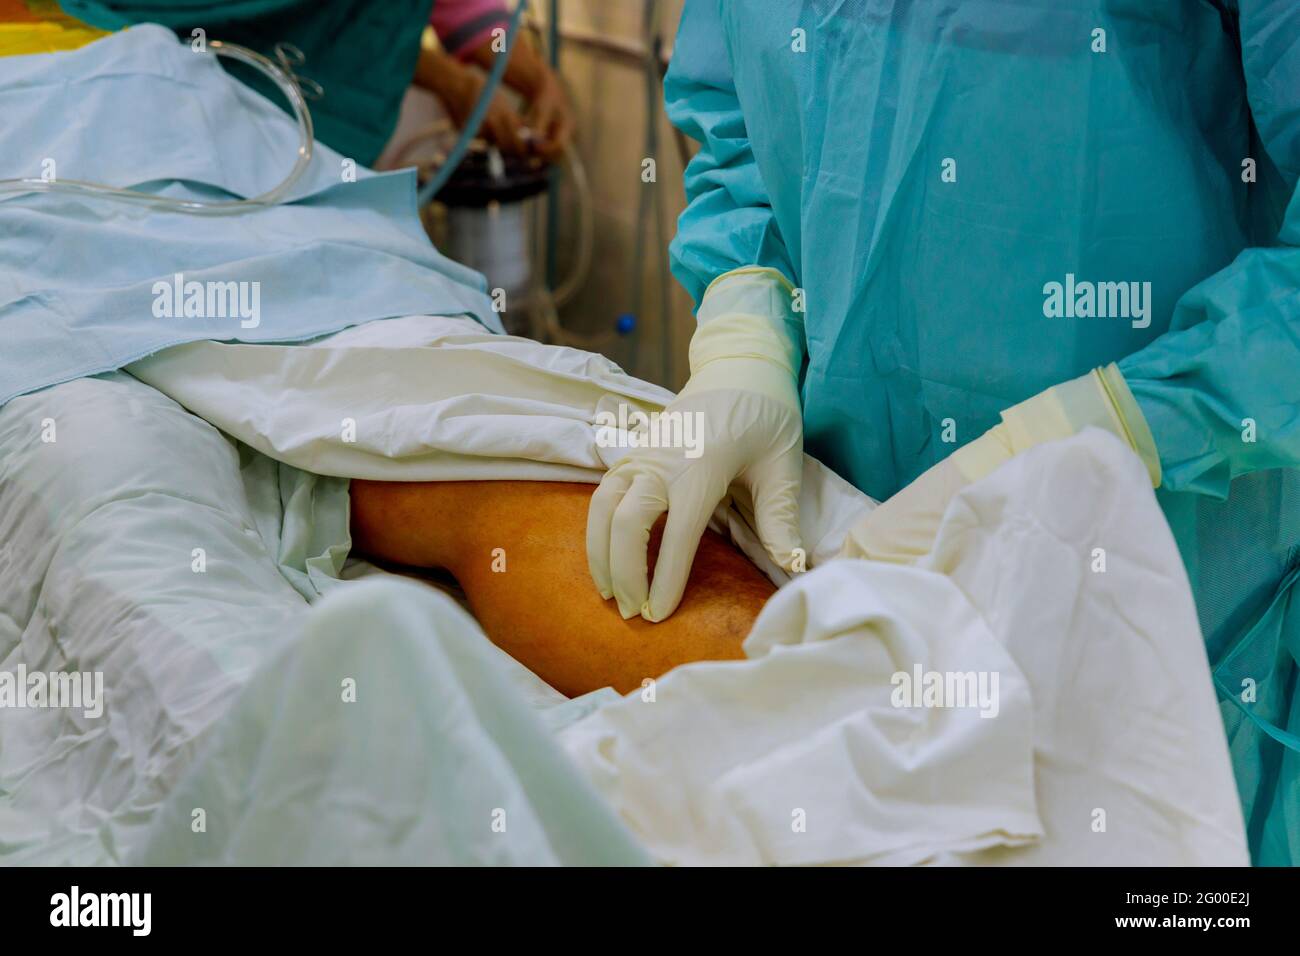 Doctor surgeon prepared leg for surgery with hospital emergency operating room Stock Photo